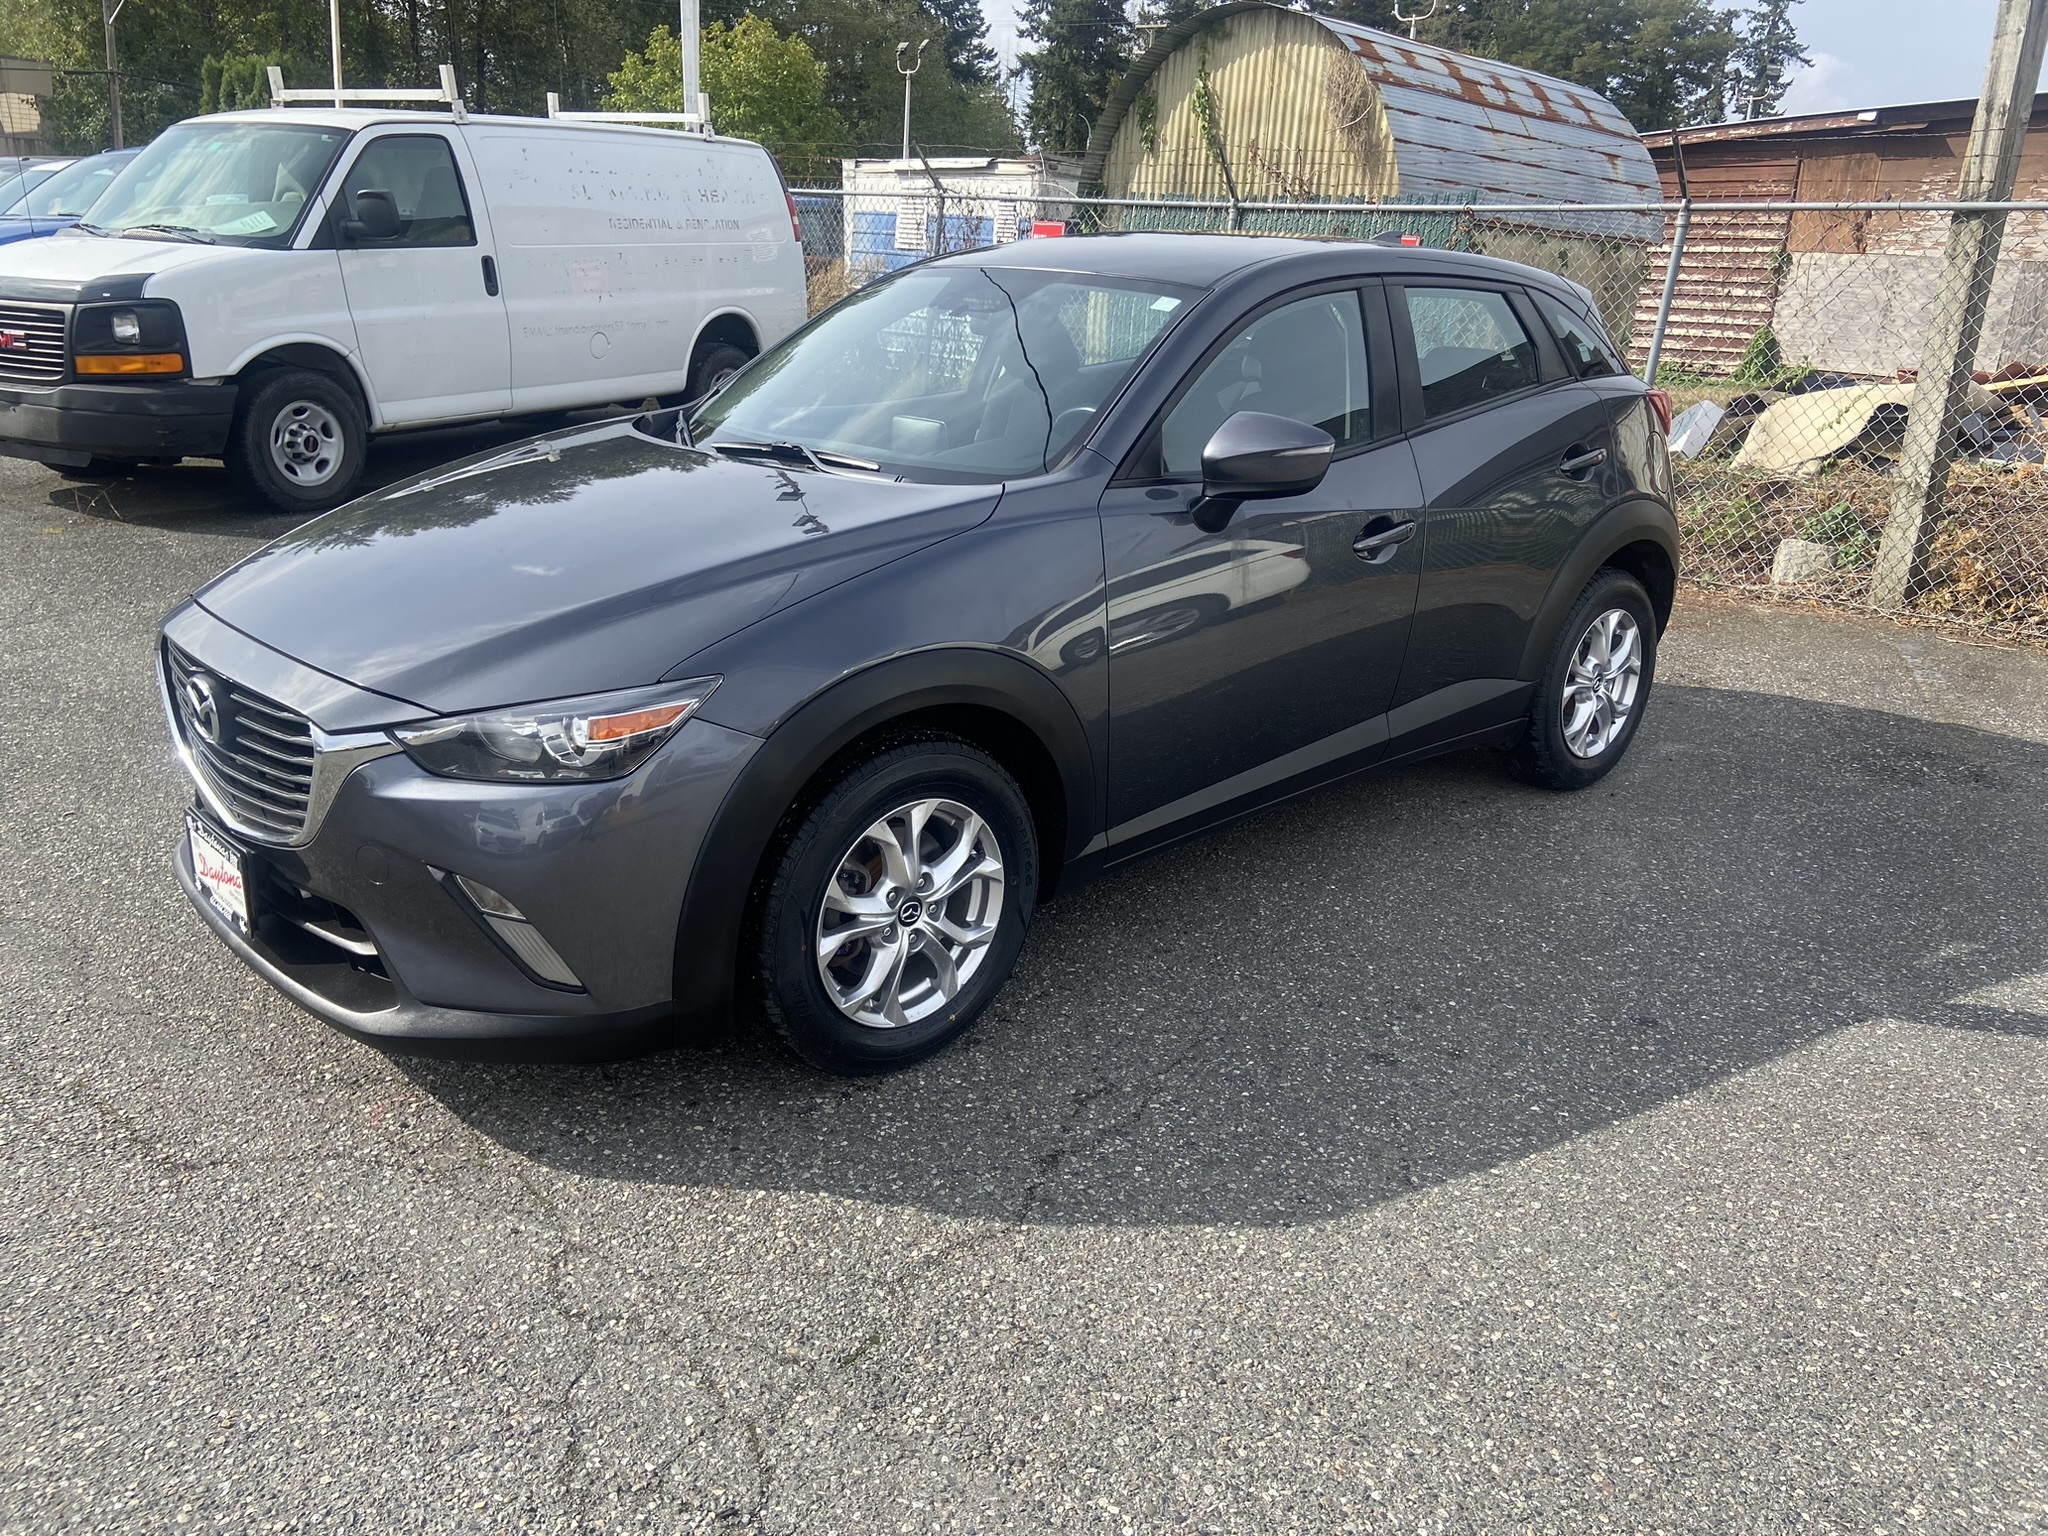 2017 Mazda CX-3 AWD 4dr GS, one owner, no accidents, we finance,